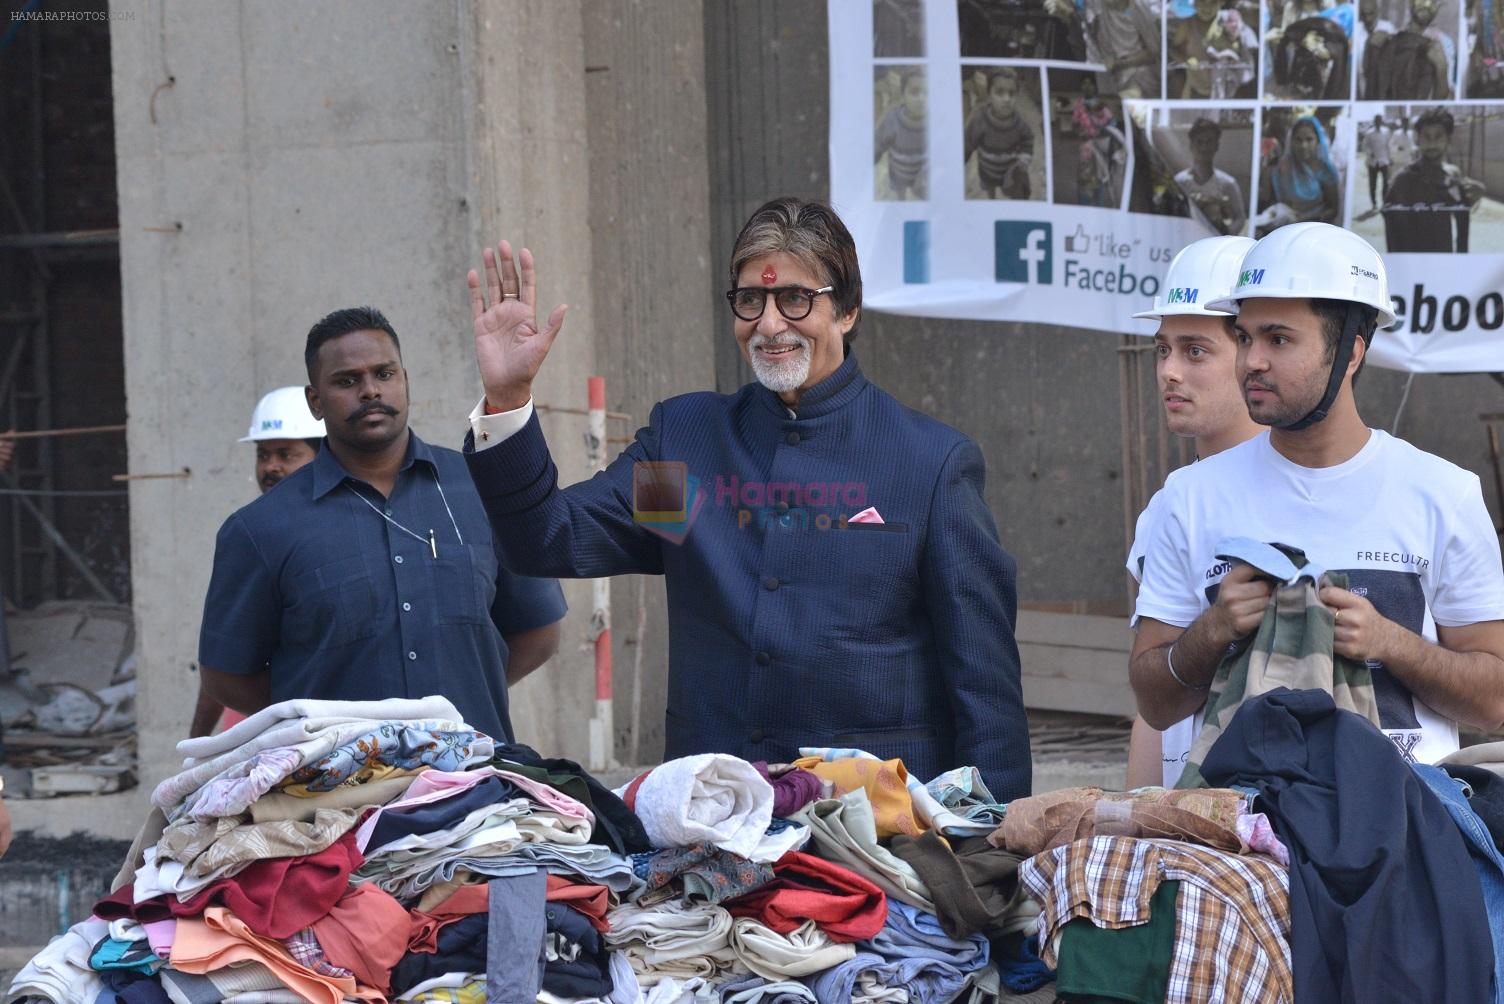 Amitabh Bachchan at Gurgaon construction site for Clothes Box Foundation donation